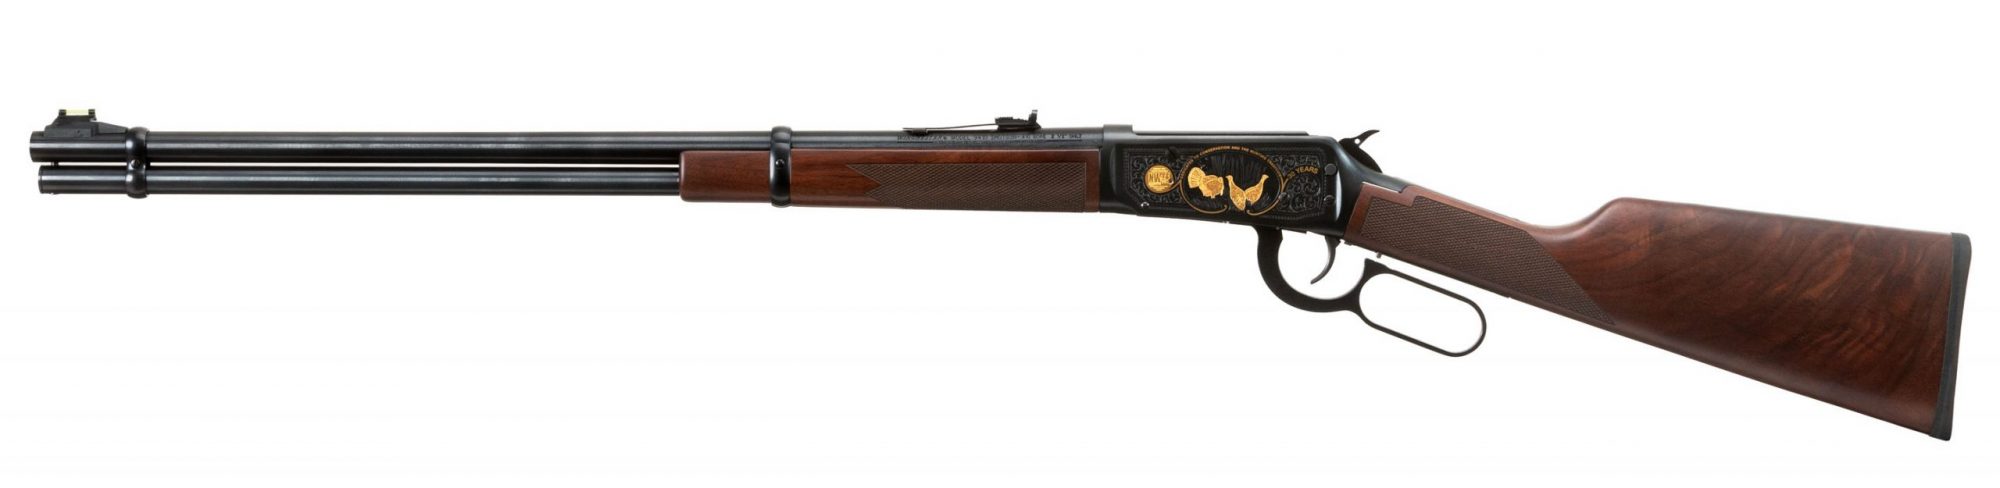 Photo of a NWTF Winchester Model 9410, for sale by Turnbull Restoration of Bloomfield, NY